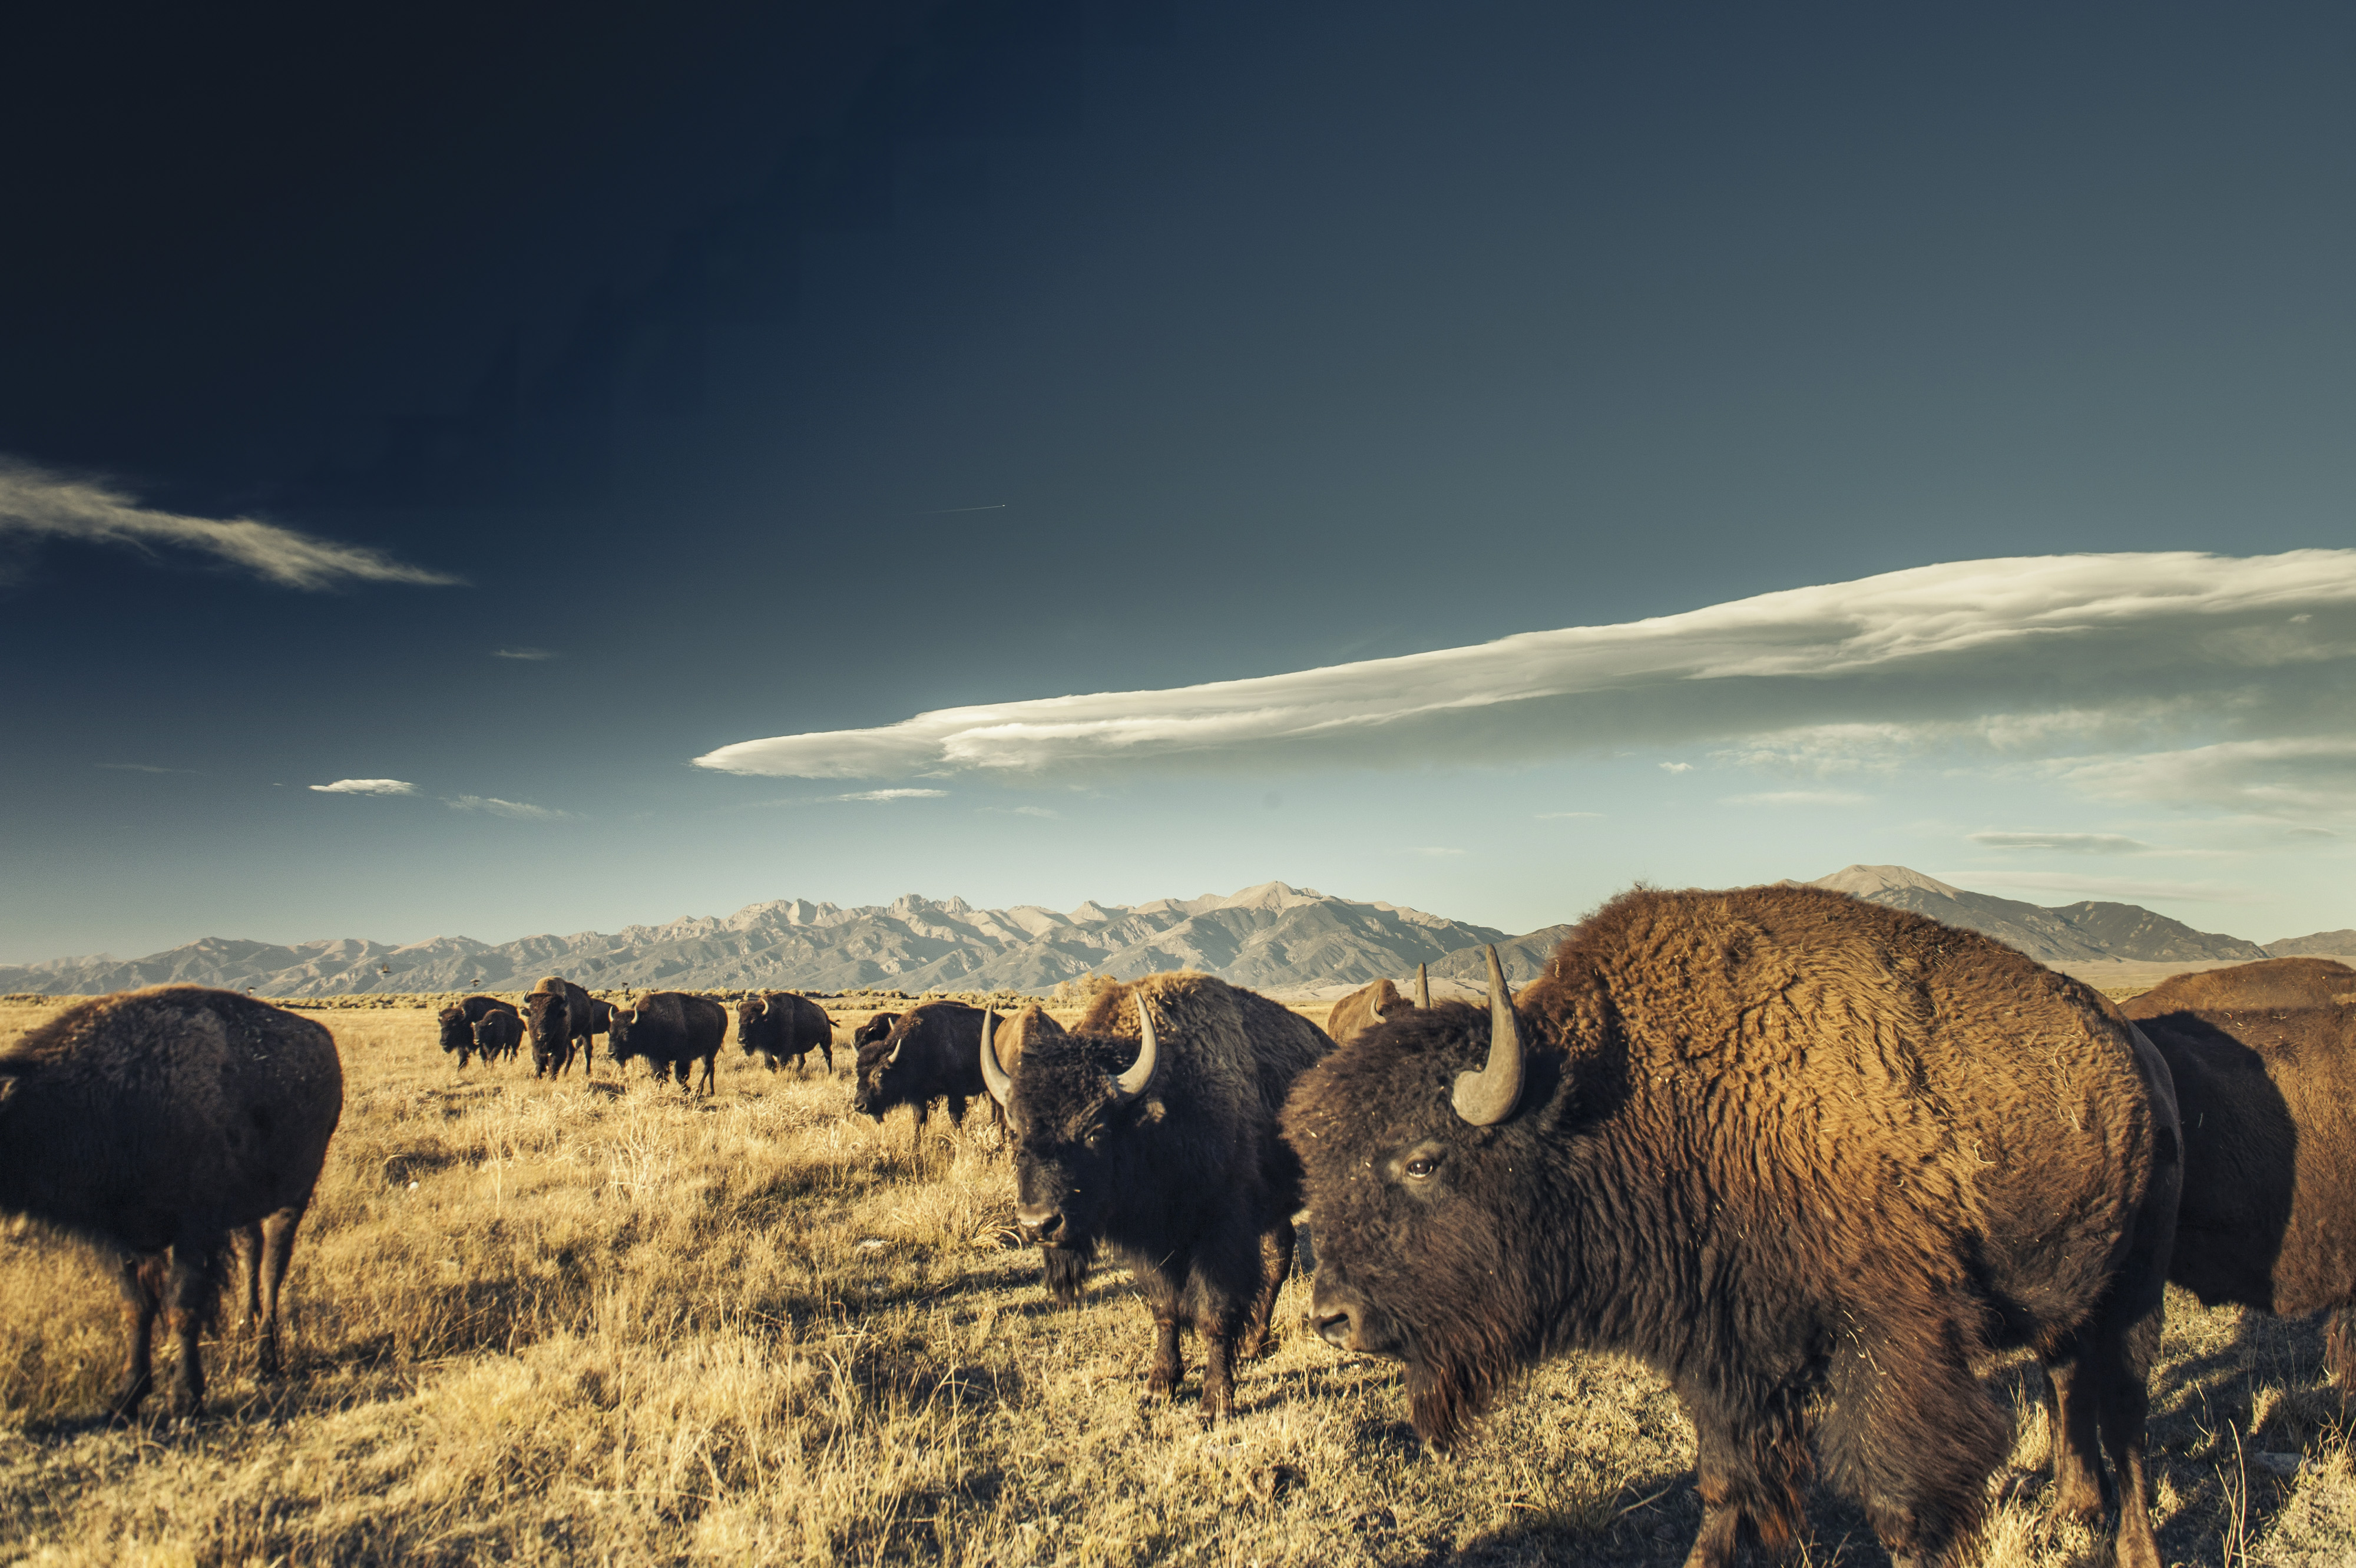 A herd of bison stand in a field with mountains in the background.